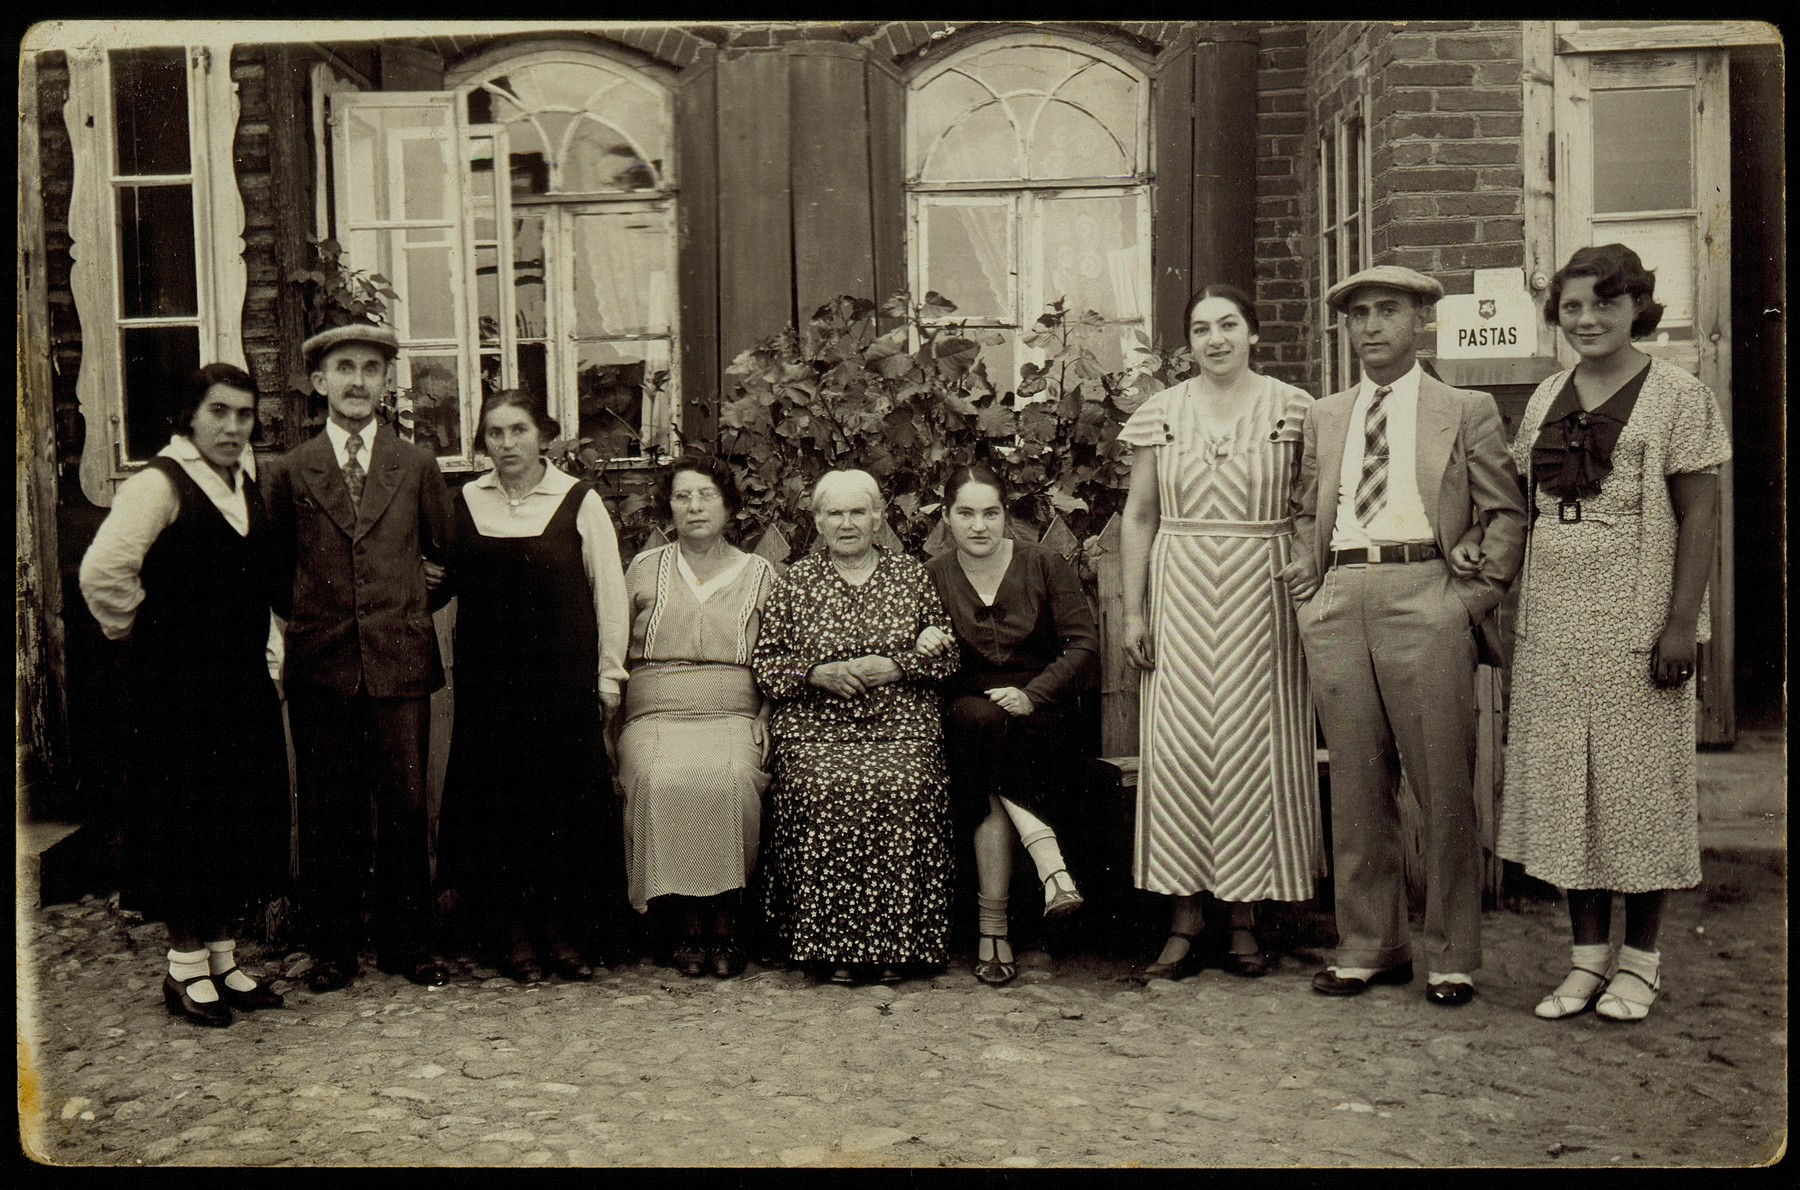 Members of the Zlotnik family gather in Aran on the occasion of a return visit by Yehuda-Leib Zlotnik from America.  

From left to right: Frieda Shoob, Hirsh Pruser, Fradl, Kunie's sister and mother of Roslyn Kablin, Bertha Margolis, a U.S. citizen, Mirl Resnik, Kunie Zlotnik's mother, Shifra, Kunie's sister, Kunie Resnik Zlotnik, husband, Yehuda-Leib Zlotnik, Gladys Ball, Bertha Margolis' daughter, a U.S. citizen. 

Mirl Resnik and her daughter Fradl were murdered by Lithuanians.  Shifra and her husband and three children were murdered in their home by the Germans in retaliation for the shooting of a German soldier while riding a motorcycle in the vicinity.  Kunie and Yehuda Zlotnik immigrated to Palestine.